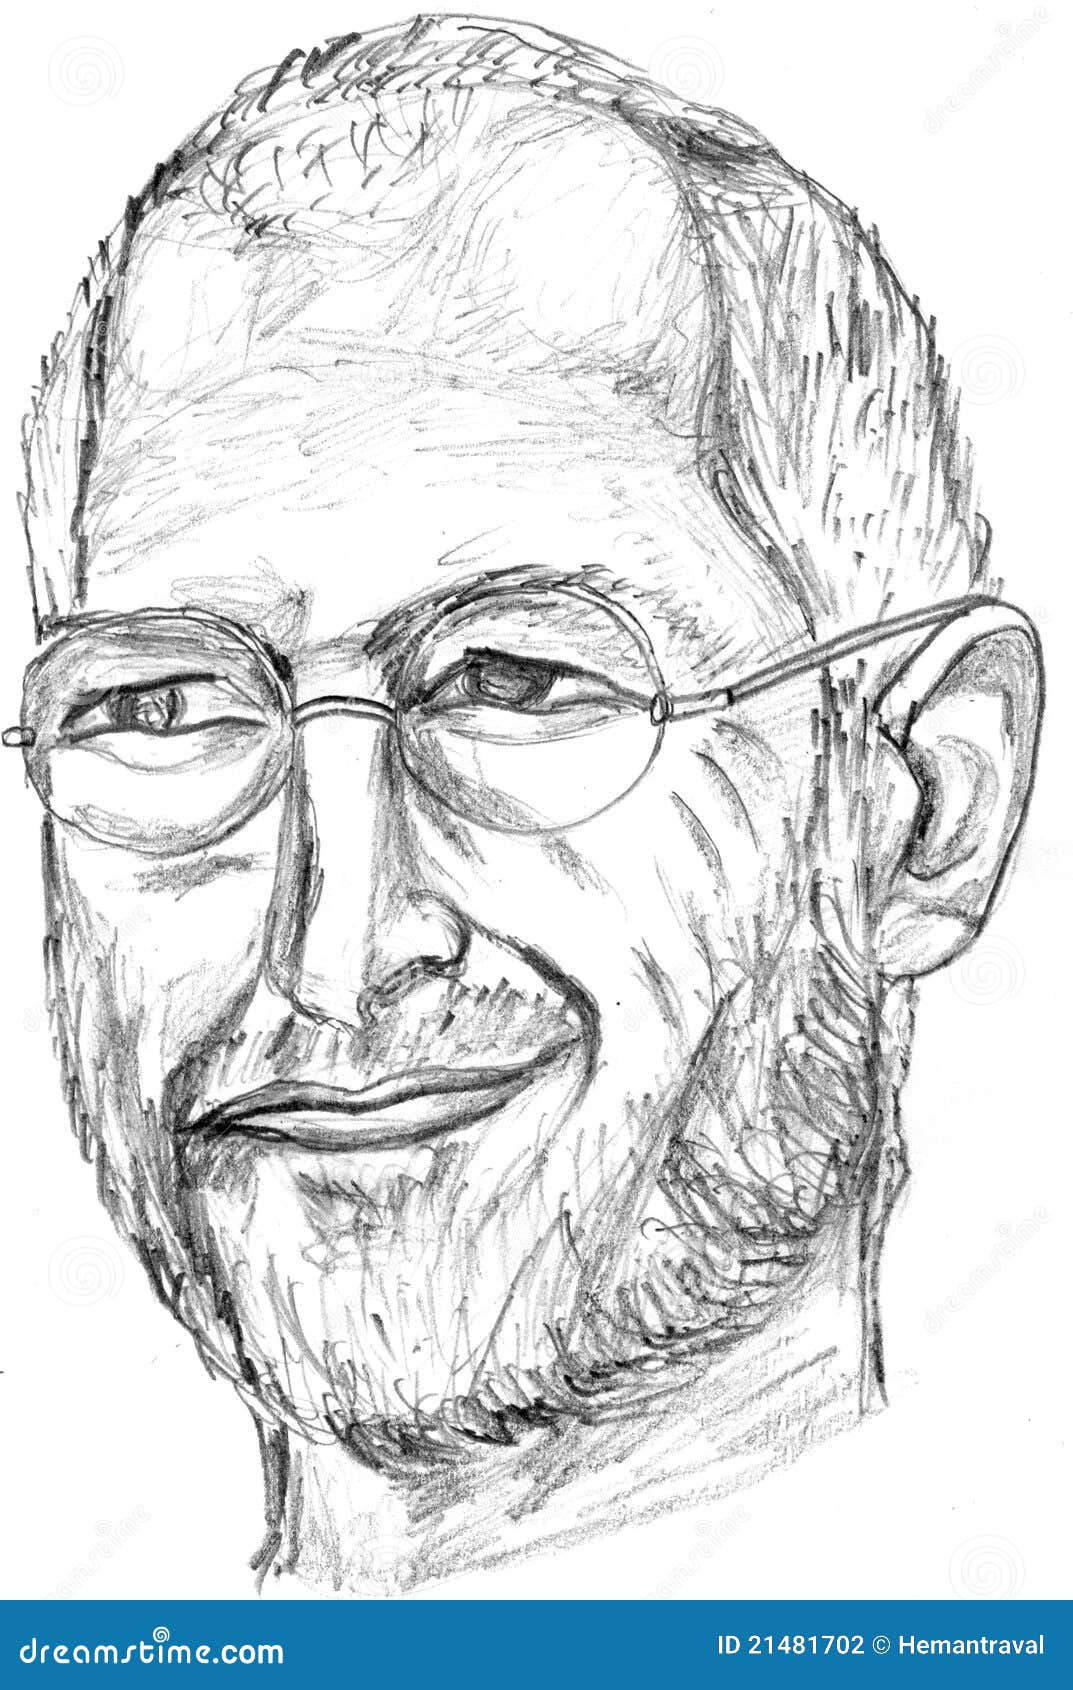 How to draw easy Steve Jobs face pencil drawing step by step  YouTube